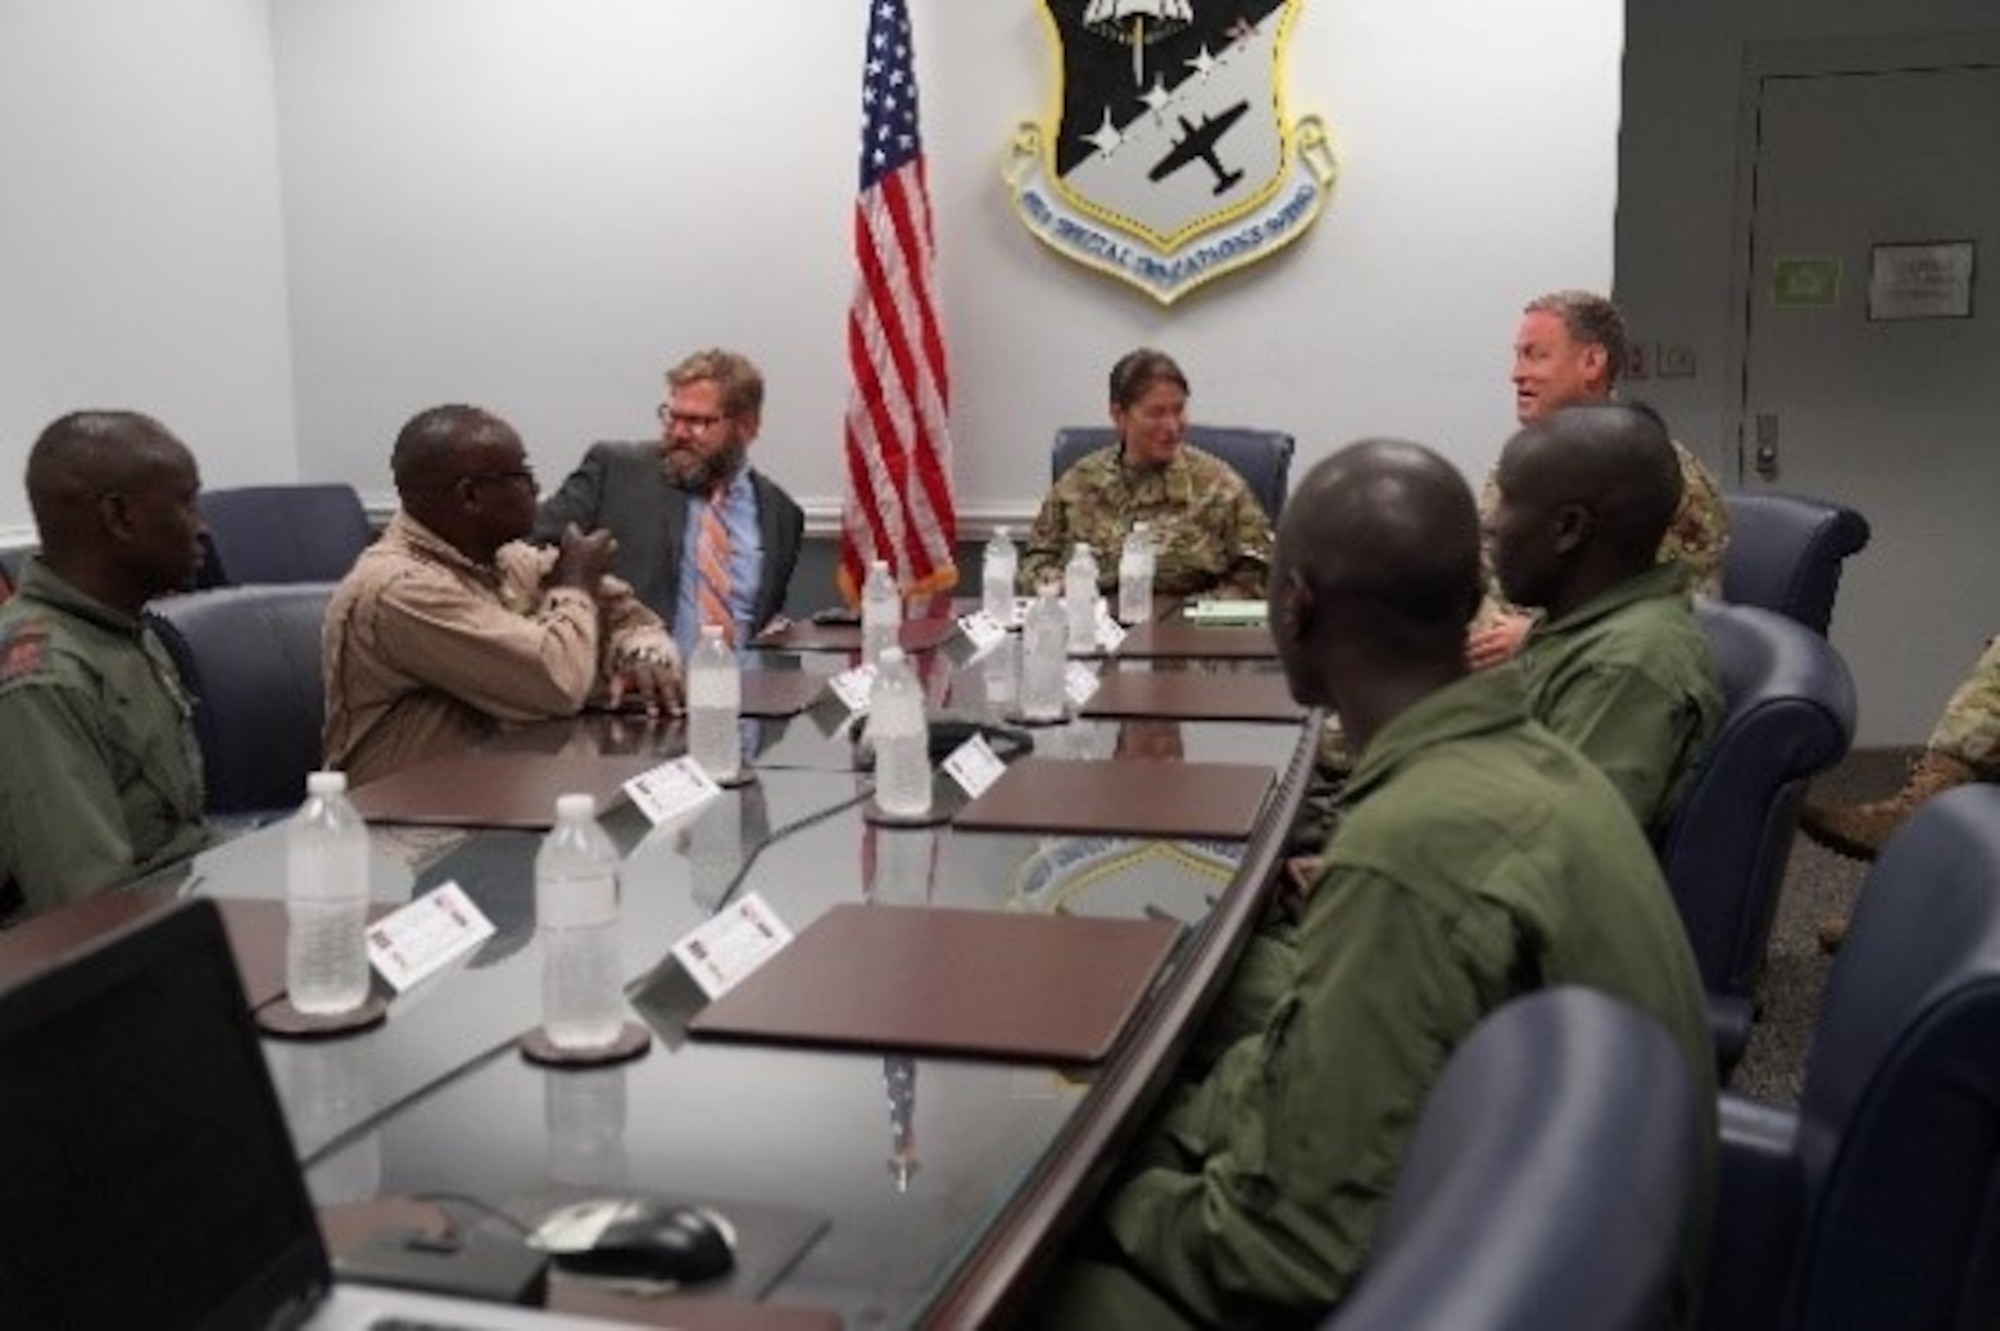 Brig. Gen. Brenda Cartier, Air Force Special Operations Command’s Director of Operations, top center, meets with Kenyan Air Force members and other U.S. military leaders attending the C-145 Skytruck aircraft training at Hurlburt Field, Florida, Sep. 17, 2019. (Courtesy Photo)